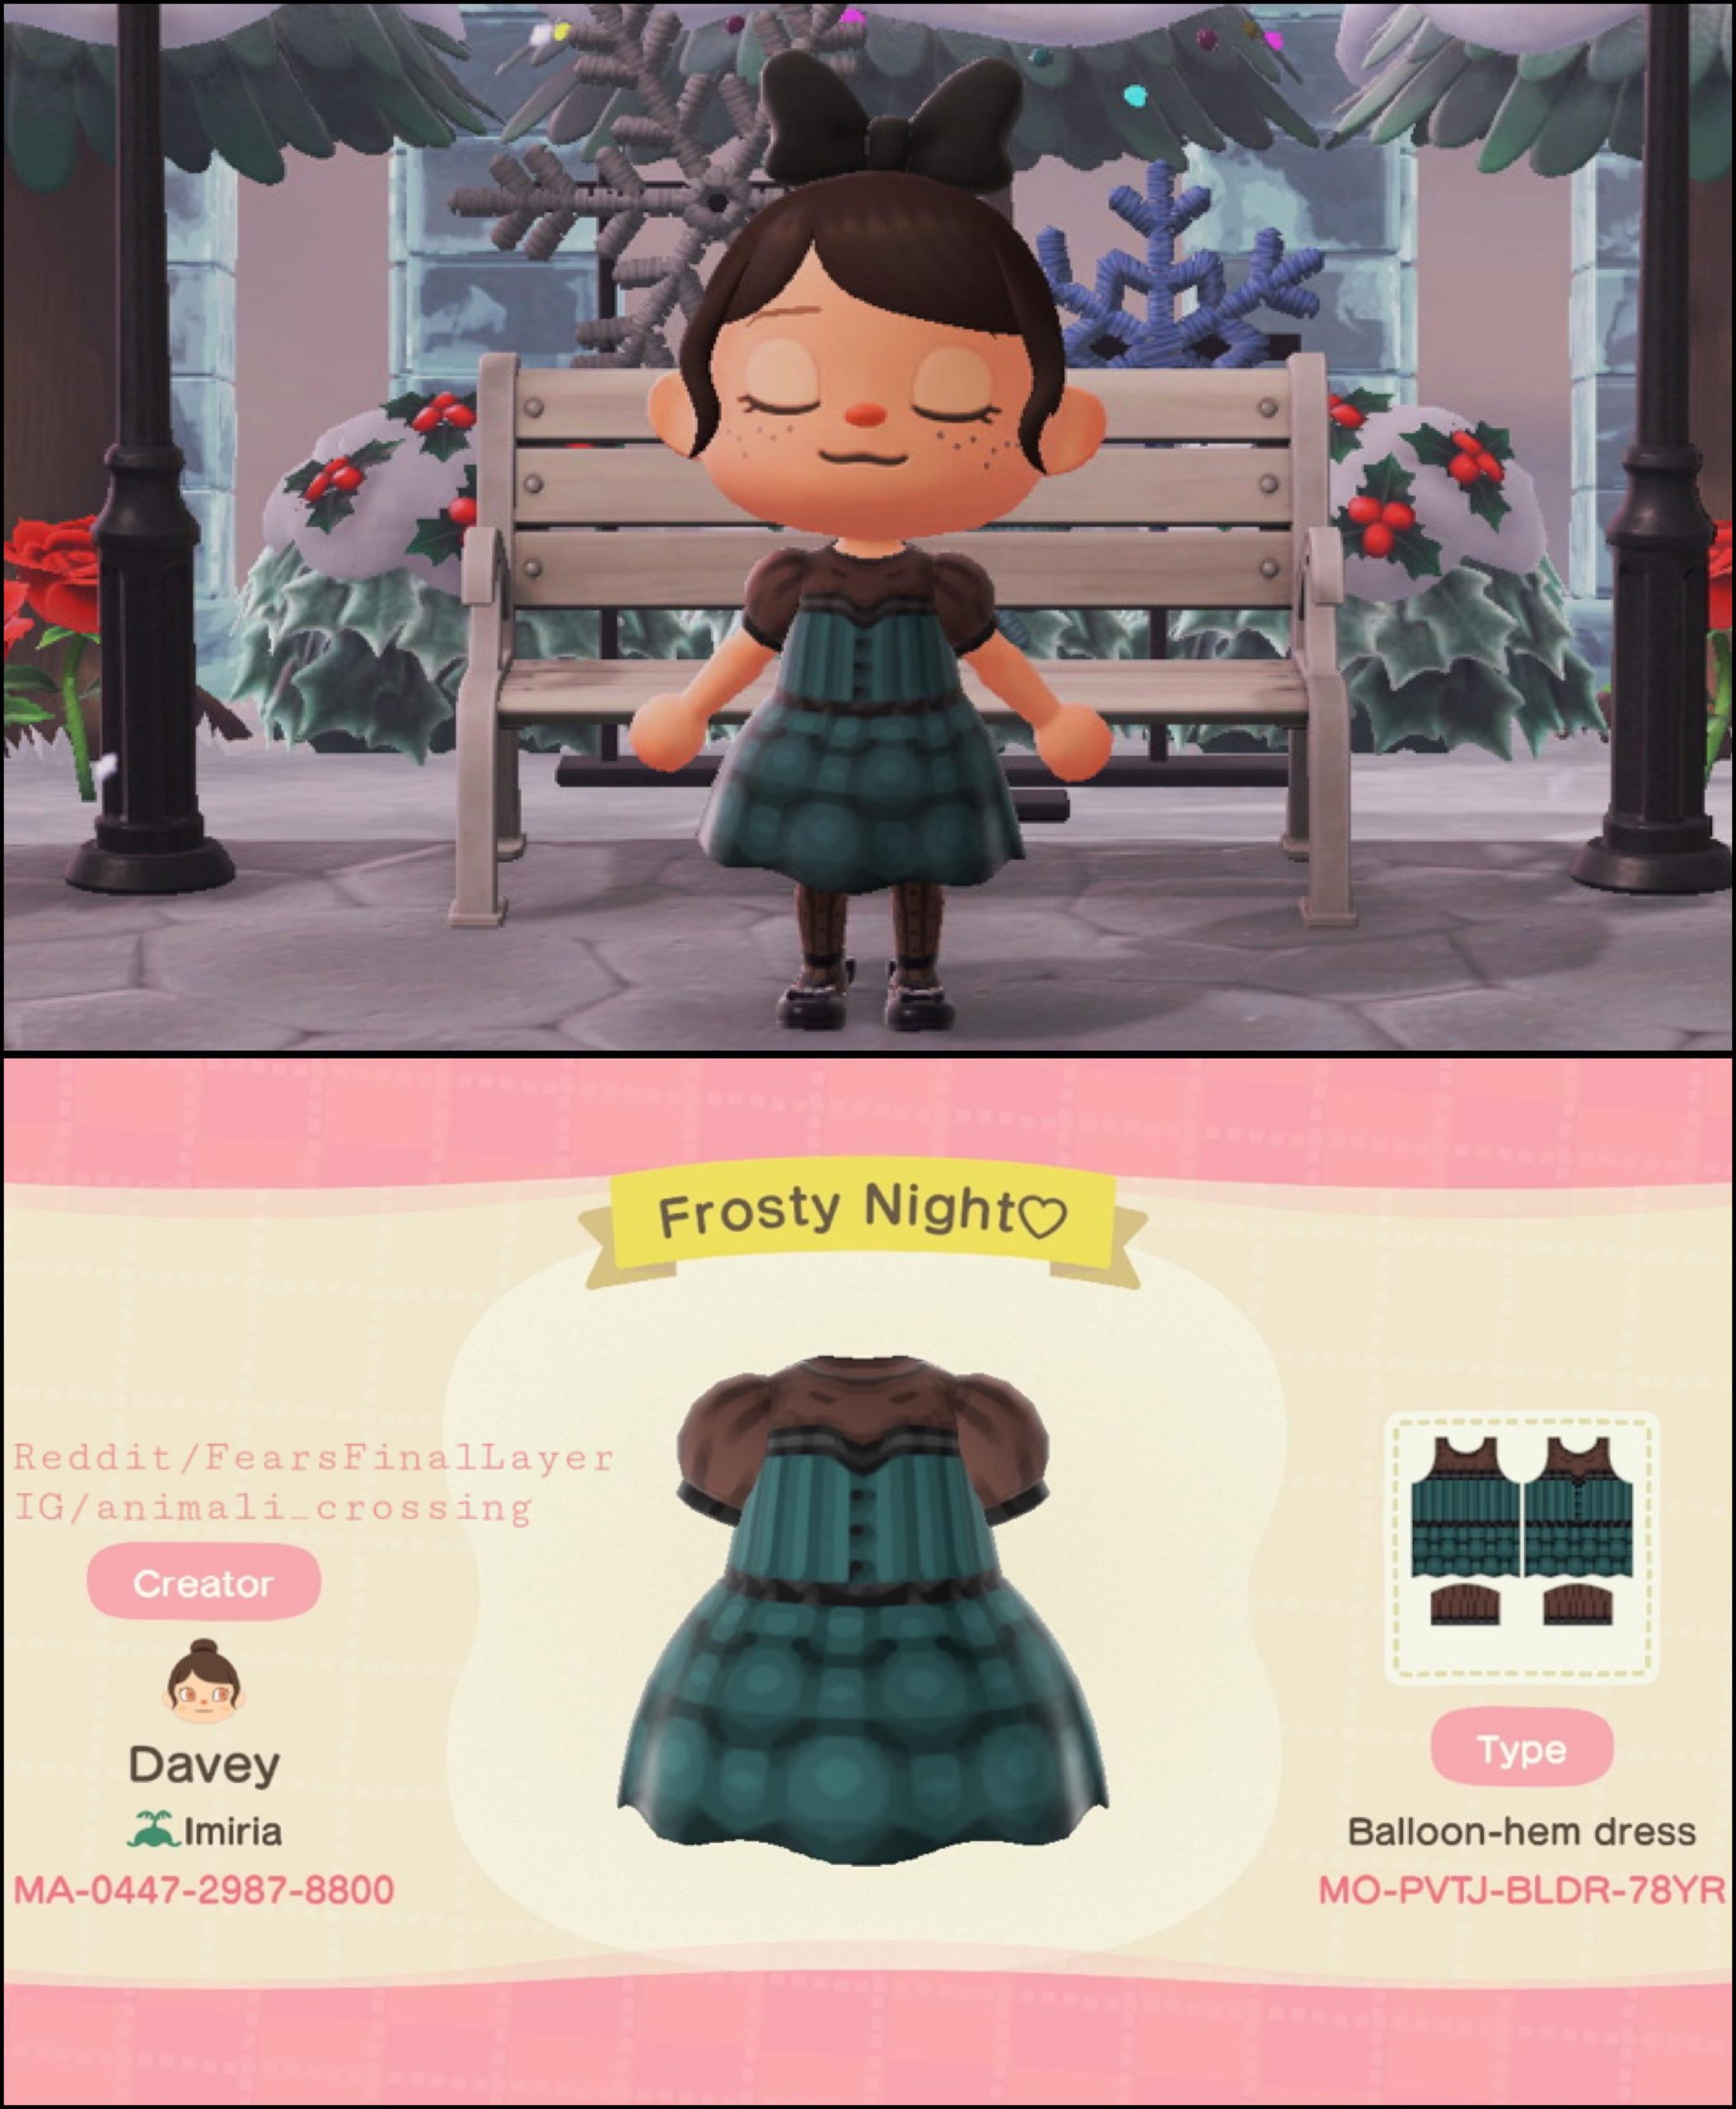 I had intended to post this on my birthday, but alas life got busy. However, I’m more that happy to present my in game birthday dress- Frosty Night ♡ (all skin compatible) Enjoy~ <3